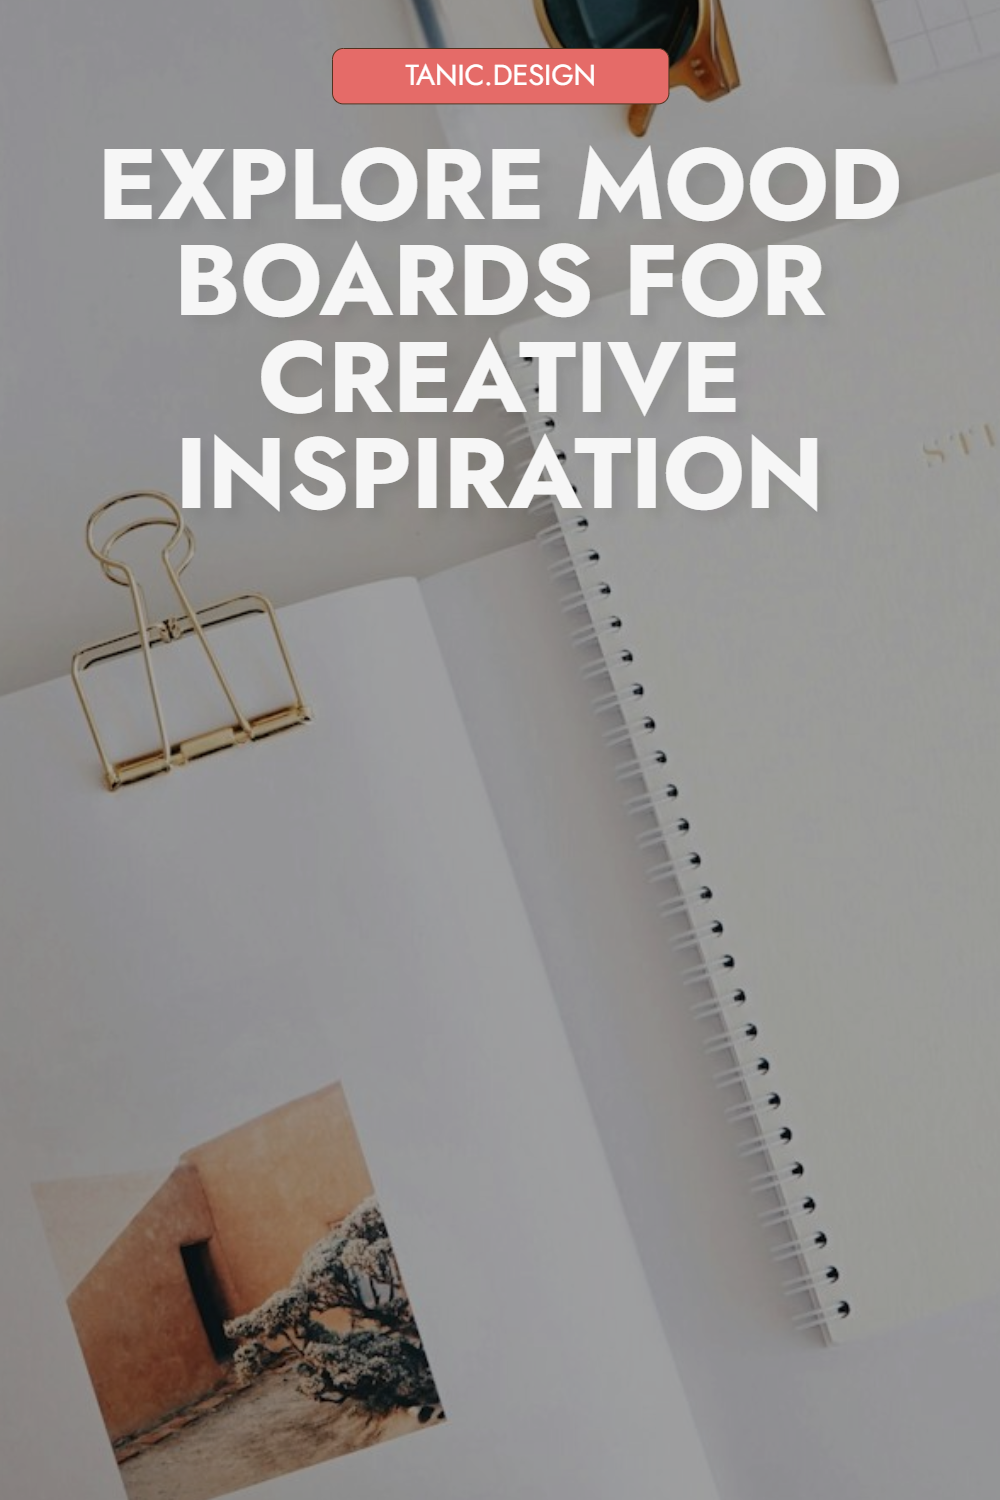 Unleash creativity and inspiration with mood boards